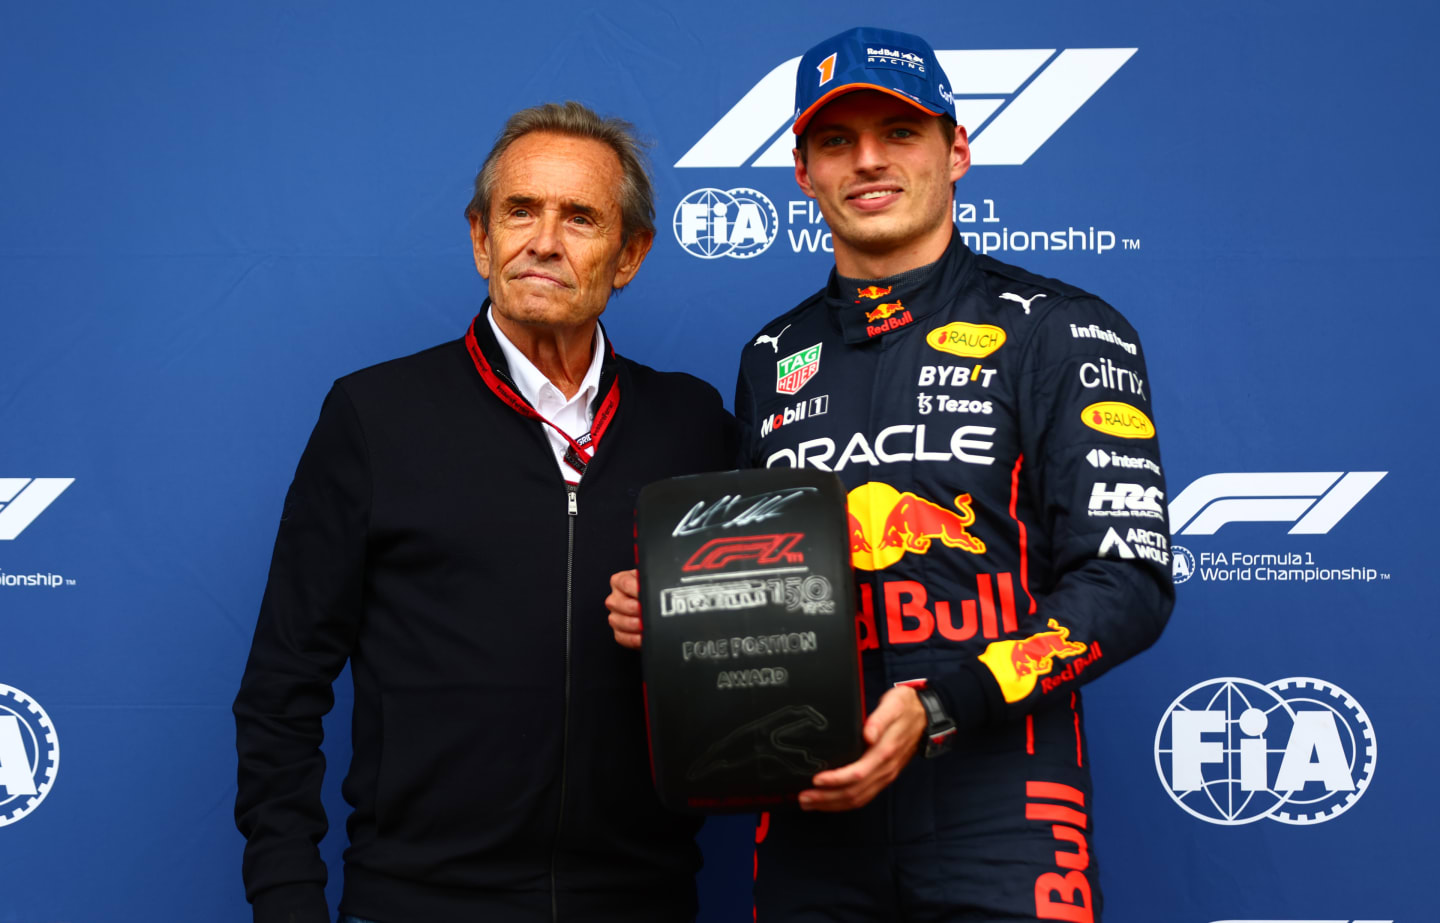 SPA, BELGIUM - AUGUST 27: Pole position qualifier Max Verstappen of the Netherlands and Oracle Red Bull Racing is presented with the Pirelli Pole Position trophy by Jacky Ickx in parc ferme during qualifying ahead of the F1 Grand Prix of Belgium at Circuit de Spa-Francorchamps on August 27, 2022 in Spa, Belgium. (Photo by Dan Istitene - Formula 1/Formula 1 via Getty Images)